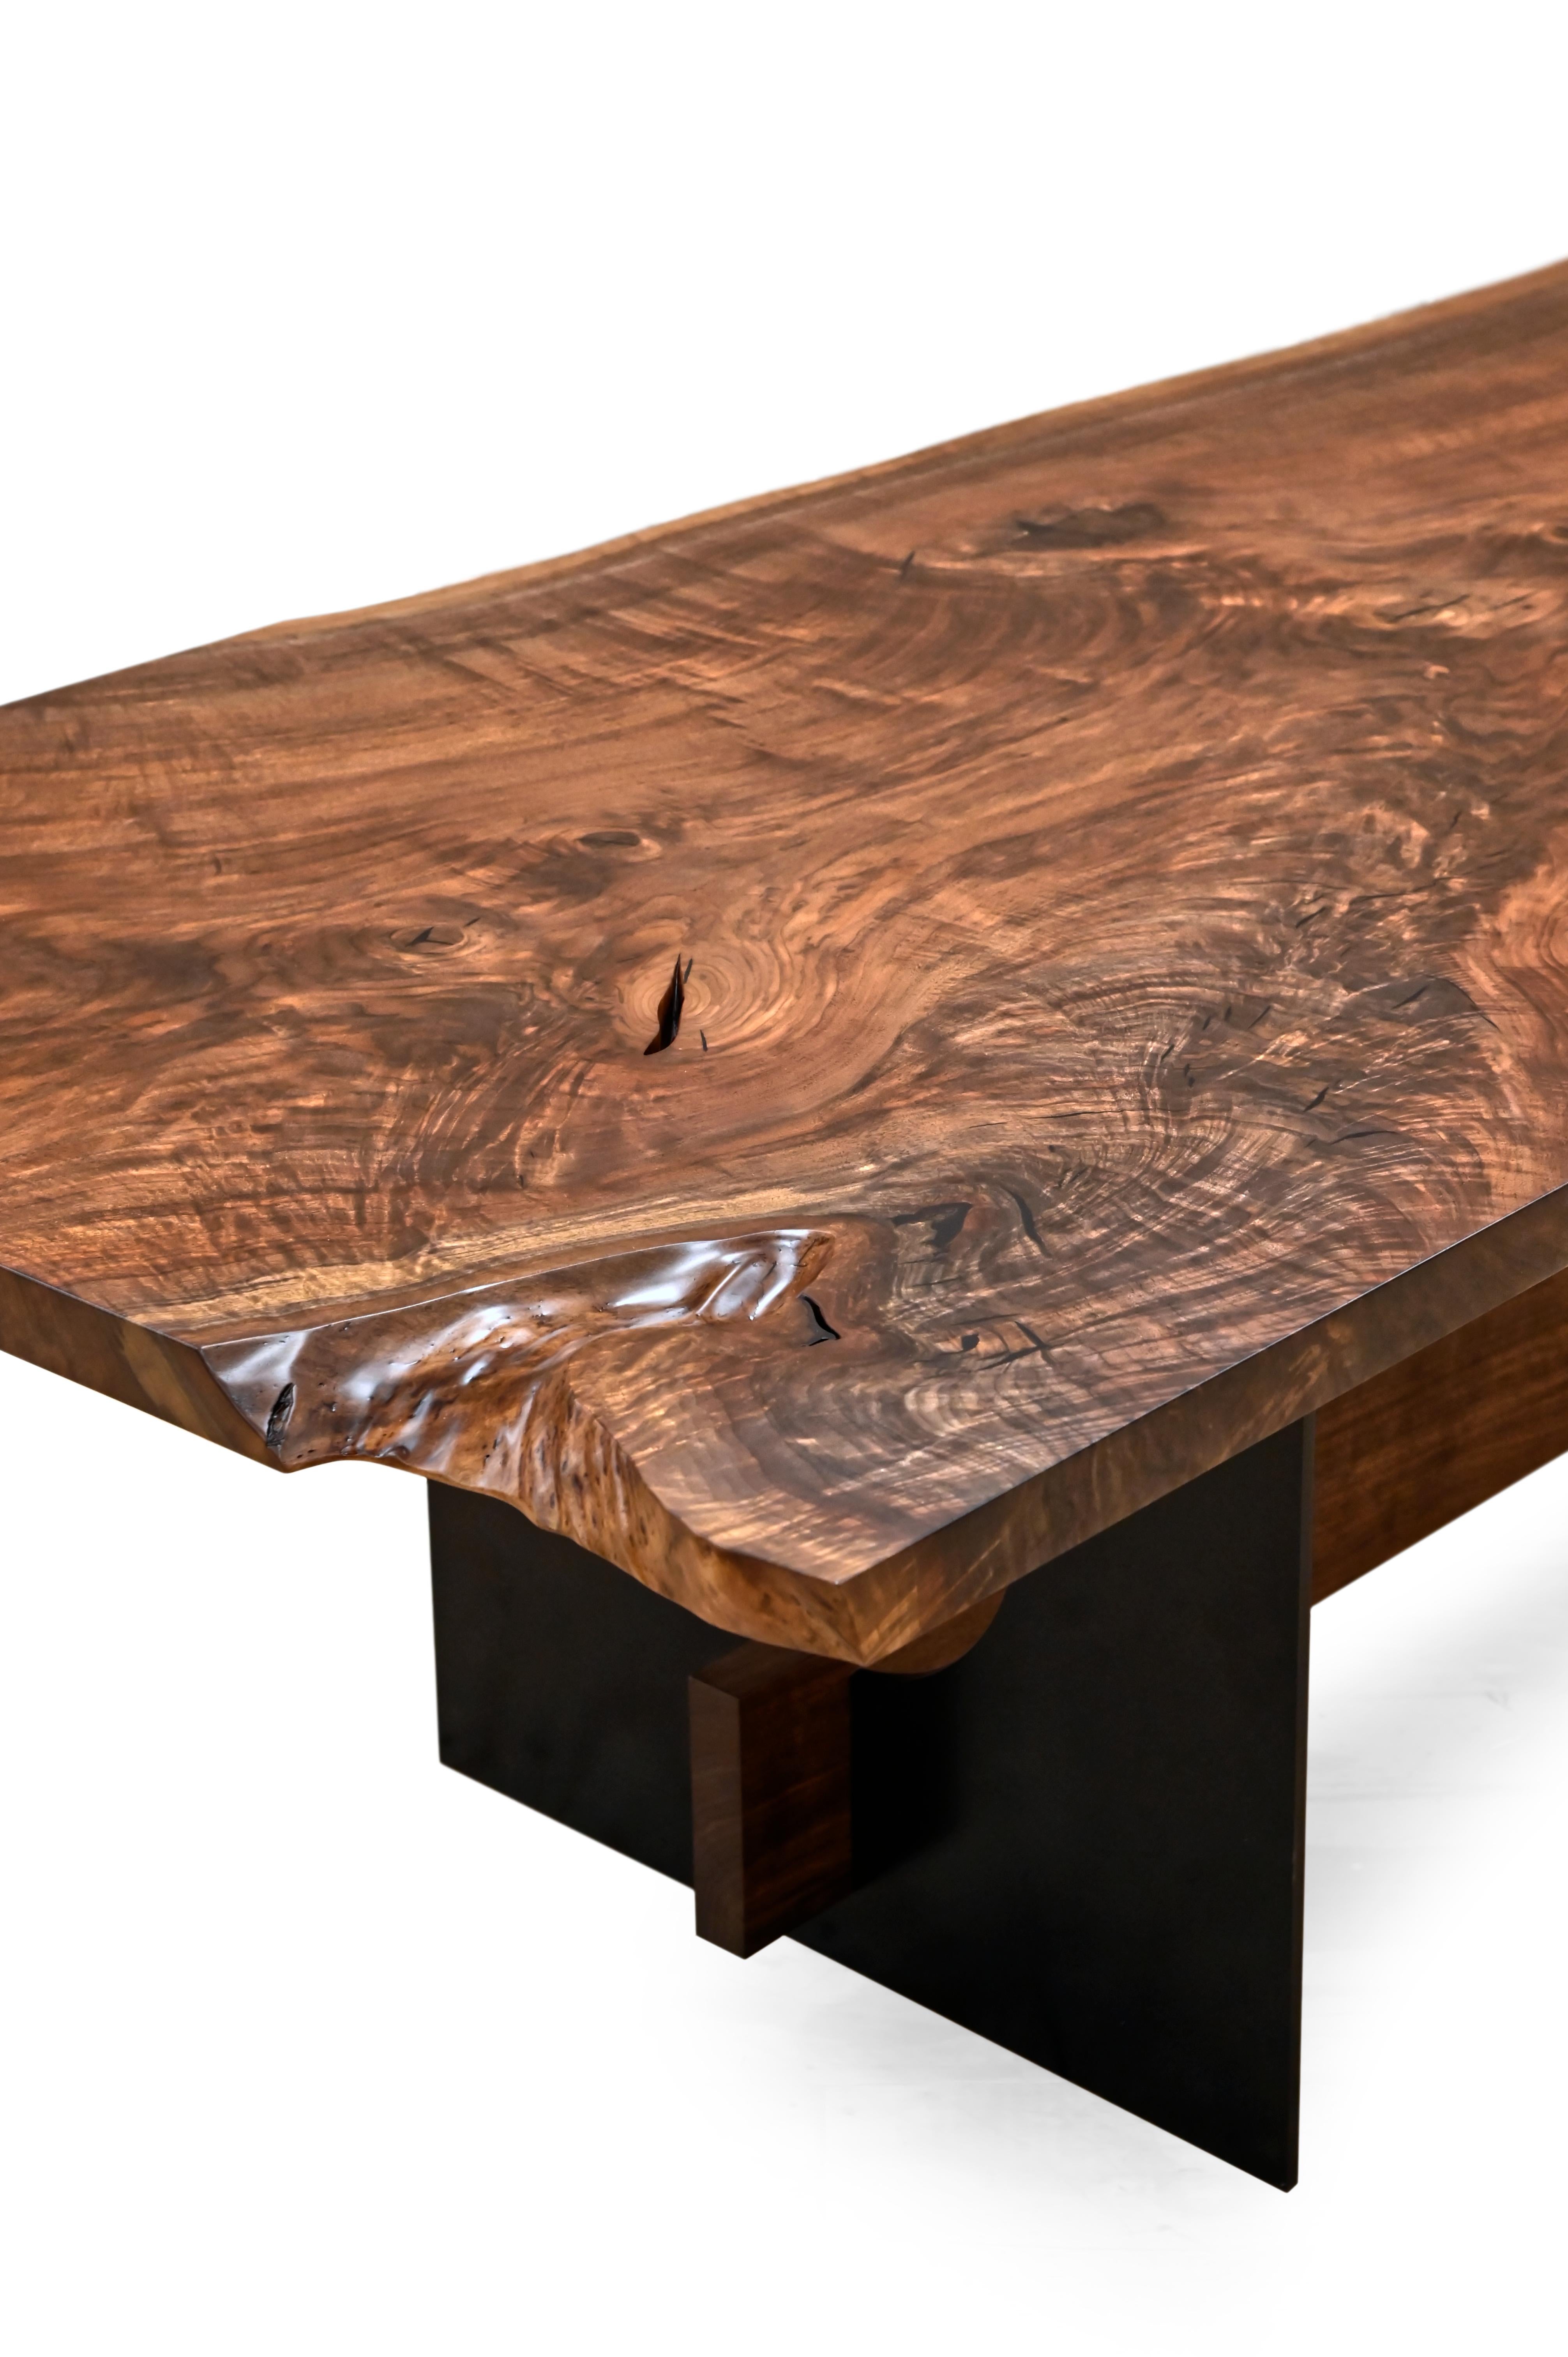 Industrial and Refined; these two words properly describe the Waubonsia Table. With a top of beautiful Walnut resting upon an pair of solid steel legs, this simple design fits well in any space from the most contemporary to the most rustic. 

The